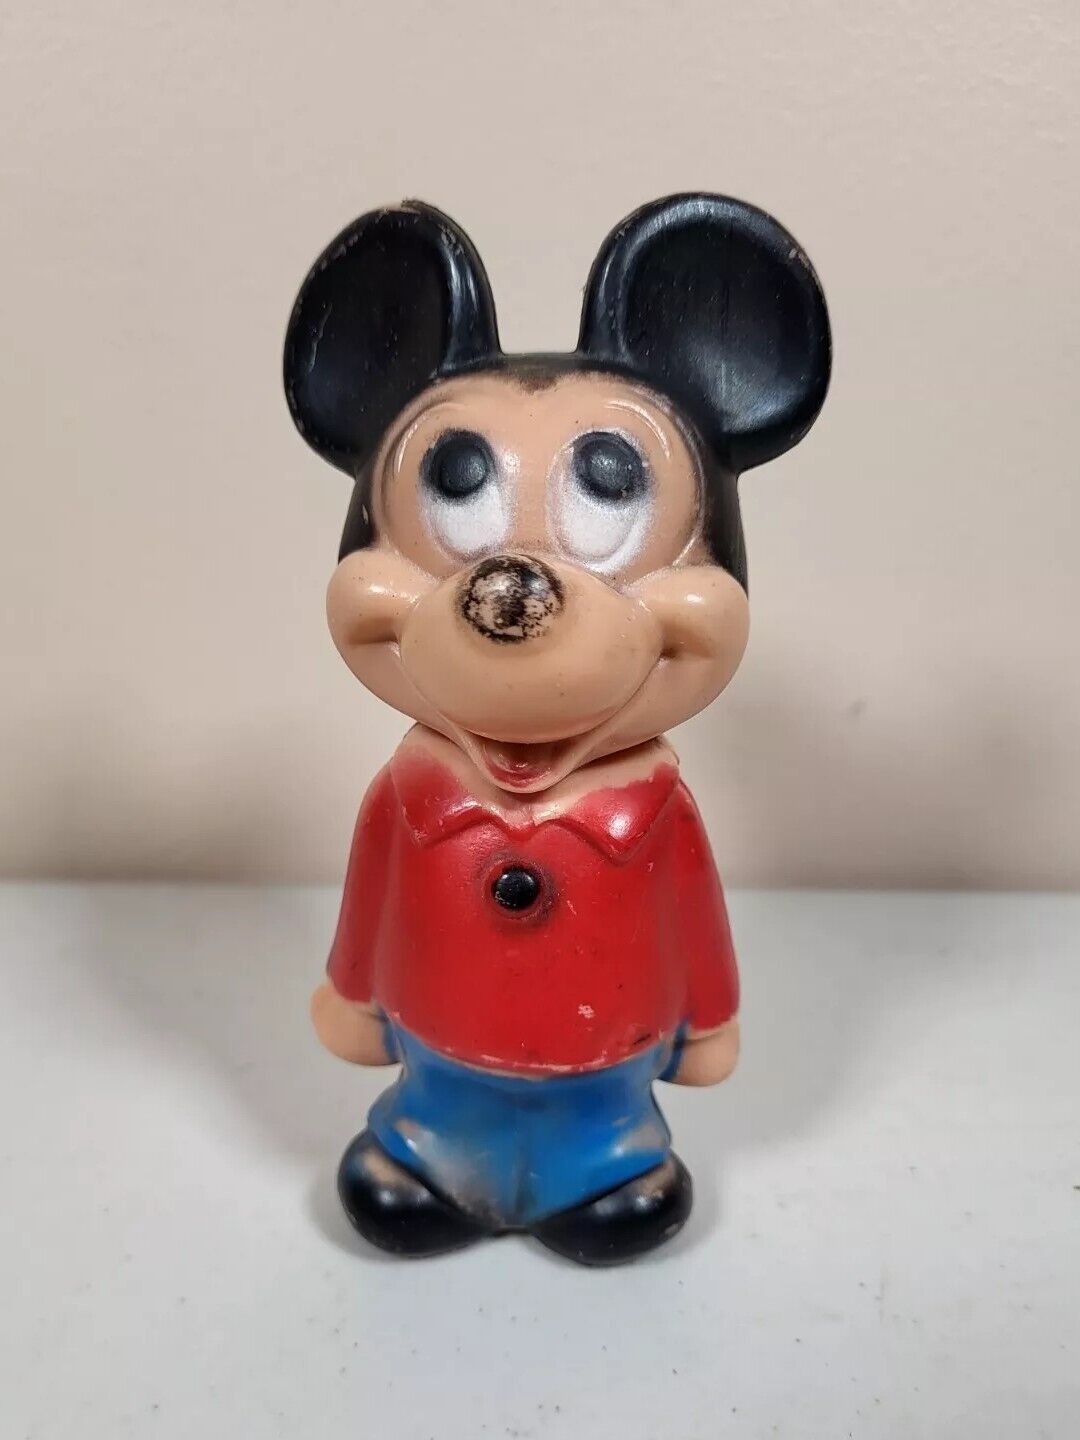 Vintage Hanna Barbera Plastic Mickey Mouse Figure Made in Hong Kong